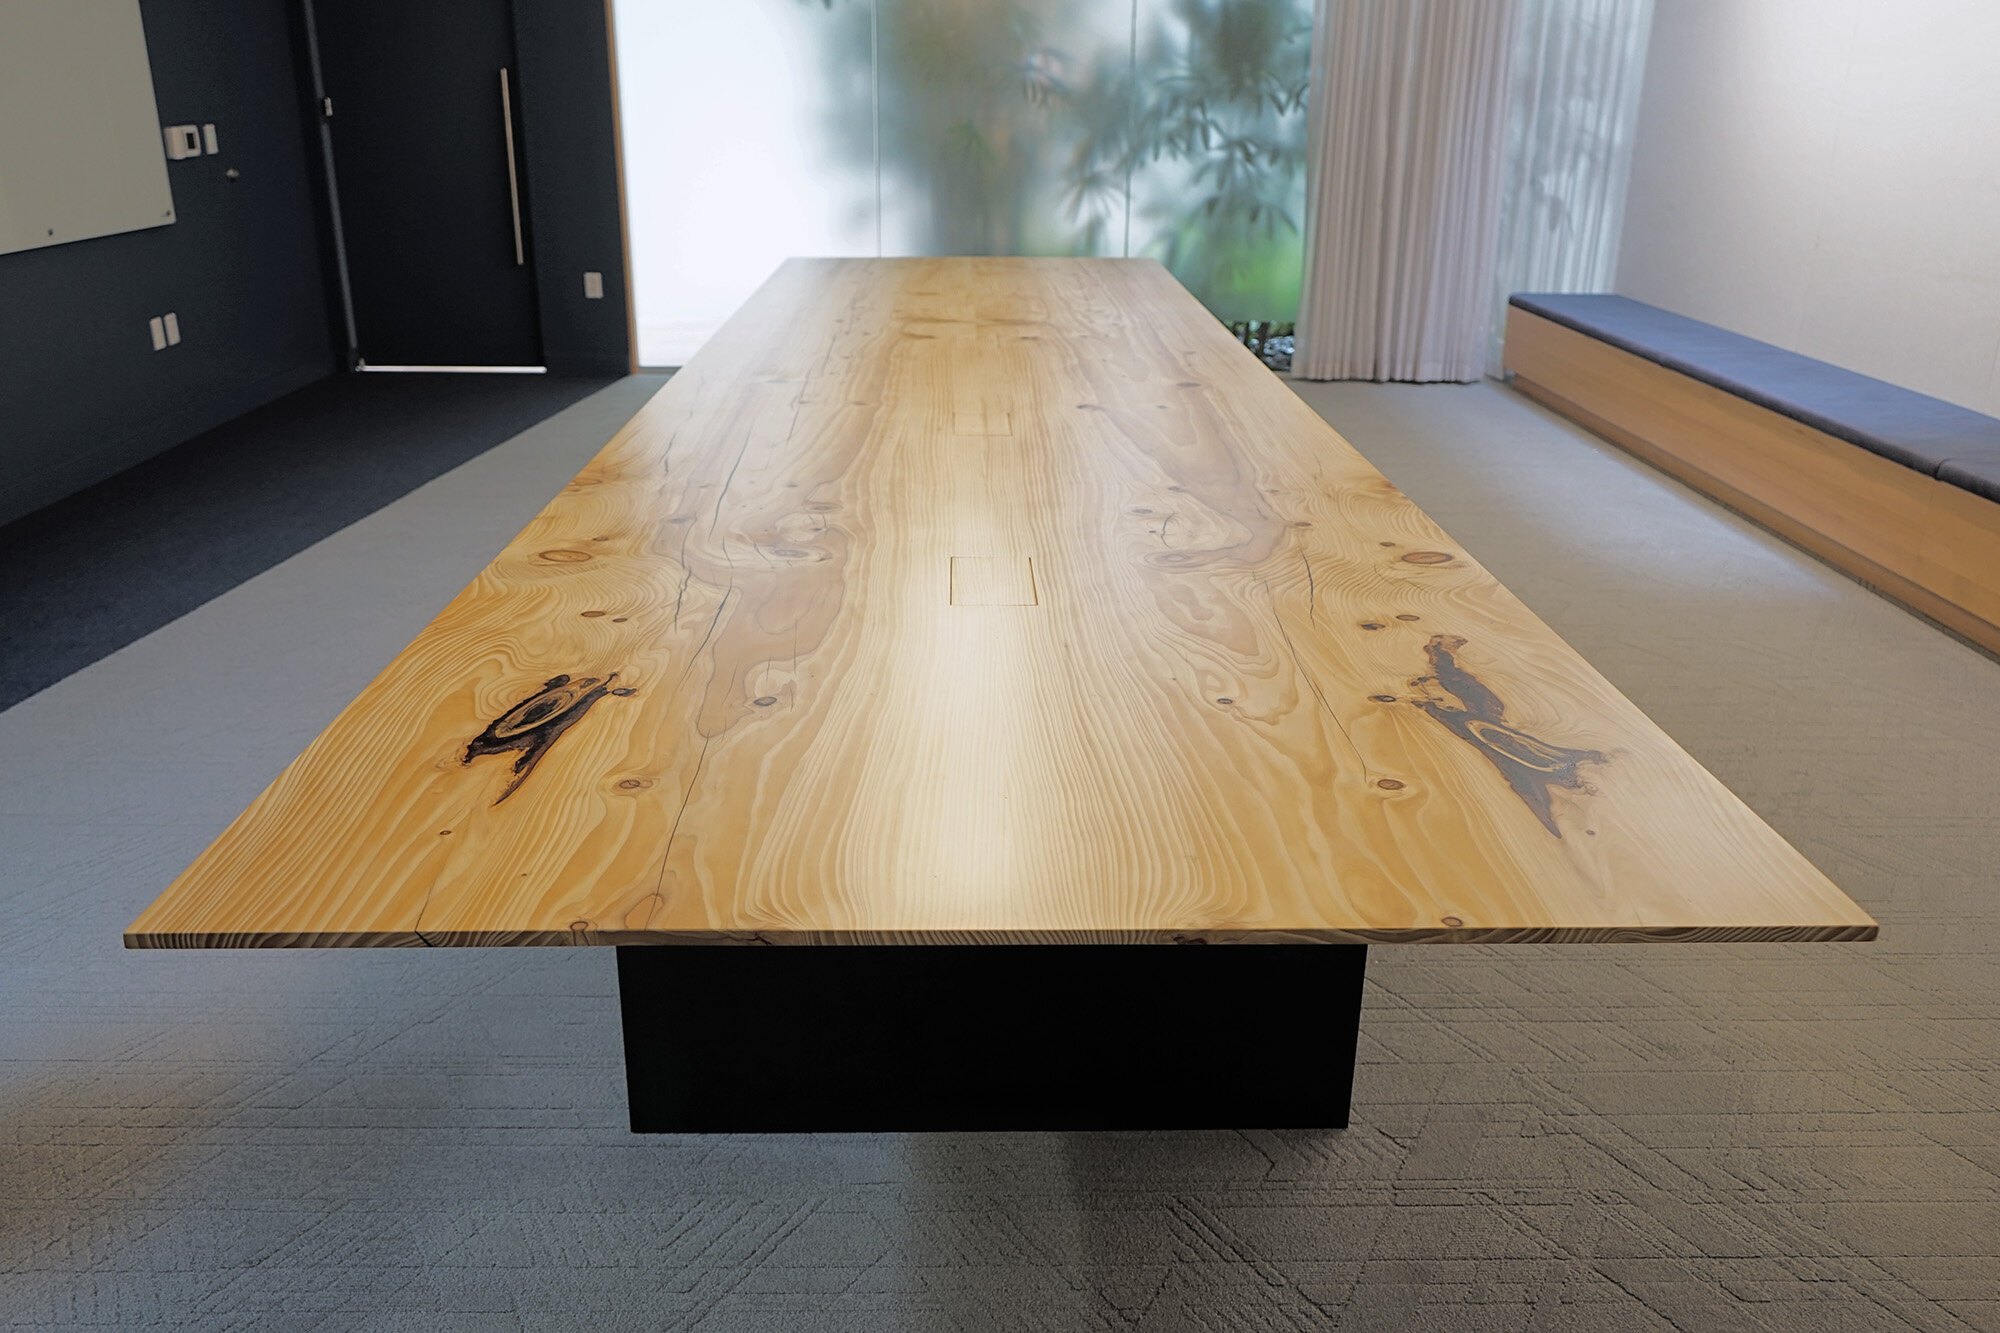 02 Fritz Conference Table End View.jpg